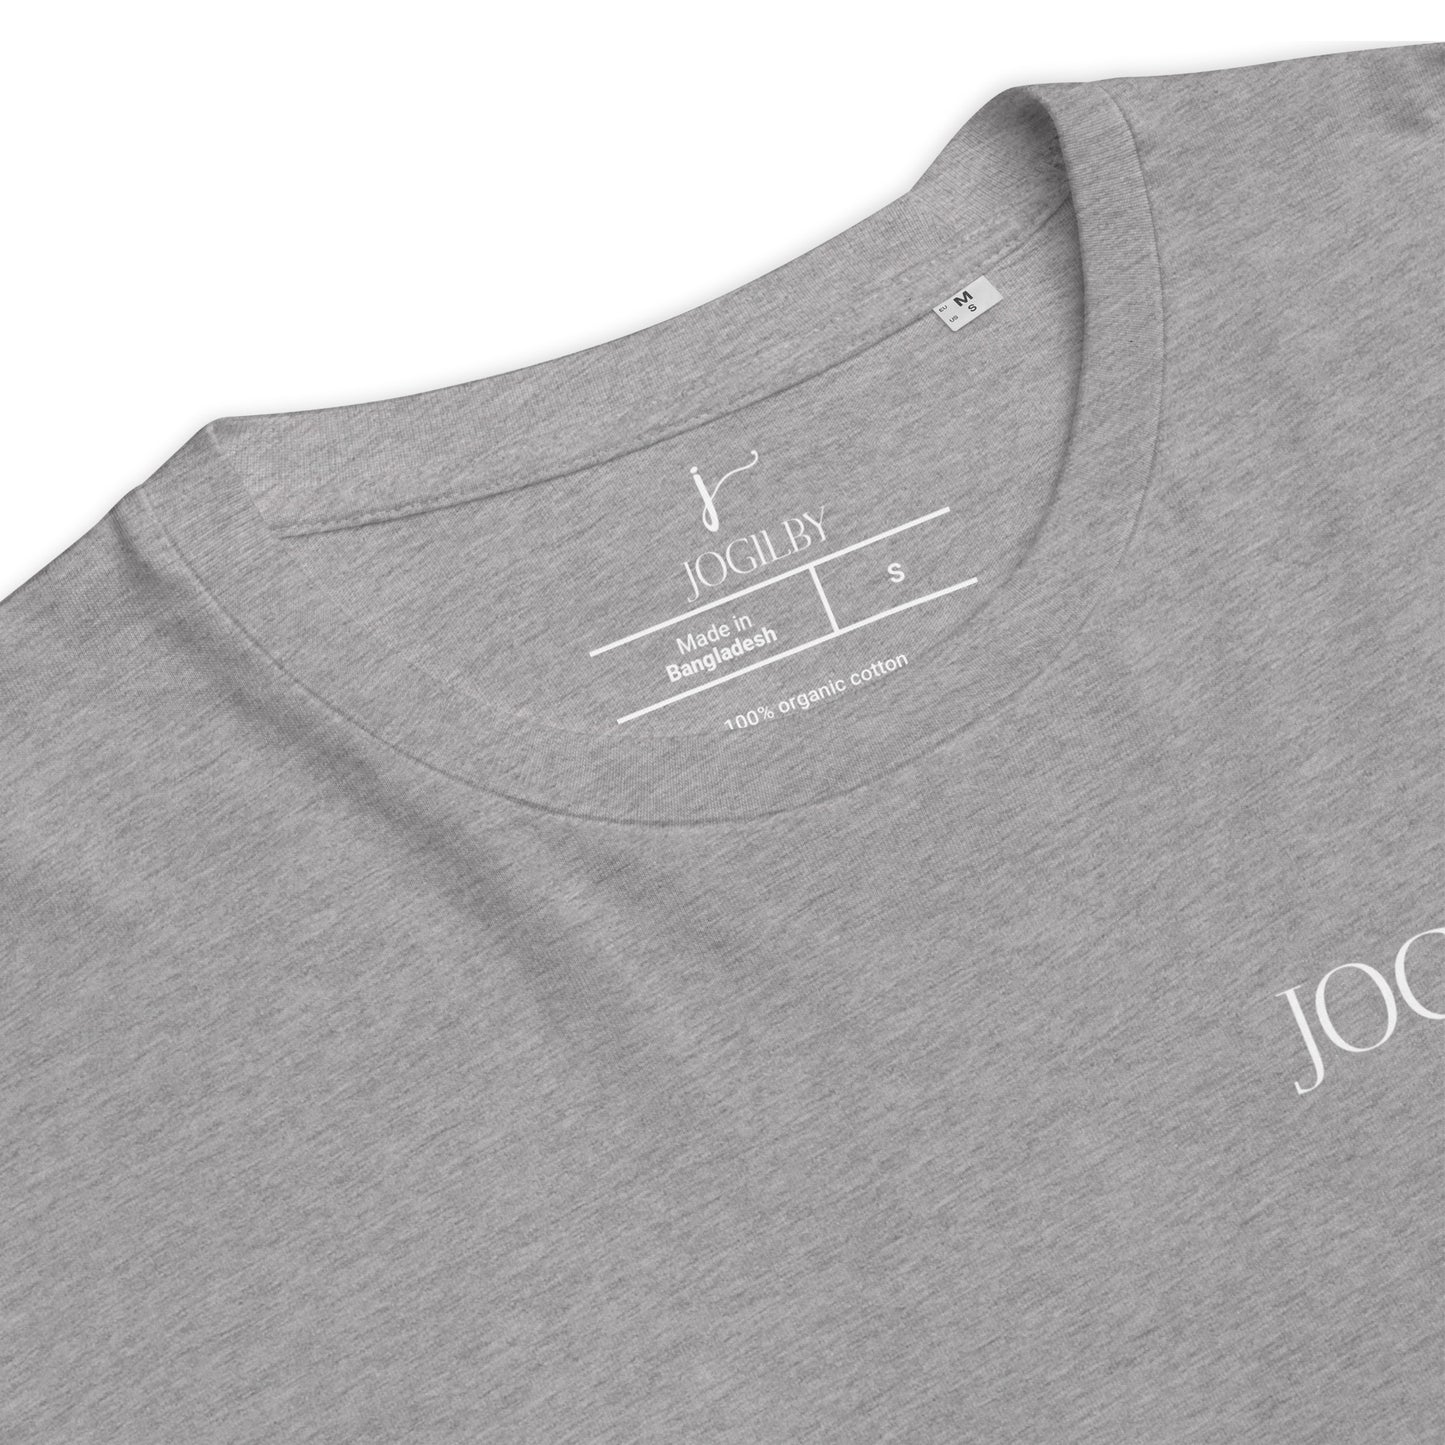 Jogilby Graphic T-Shirt